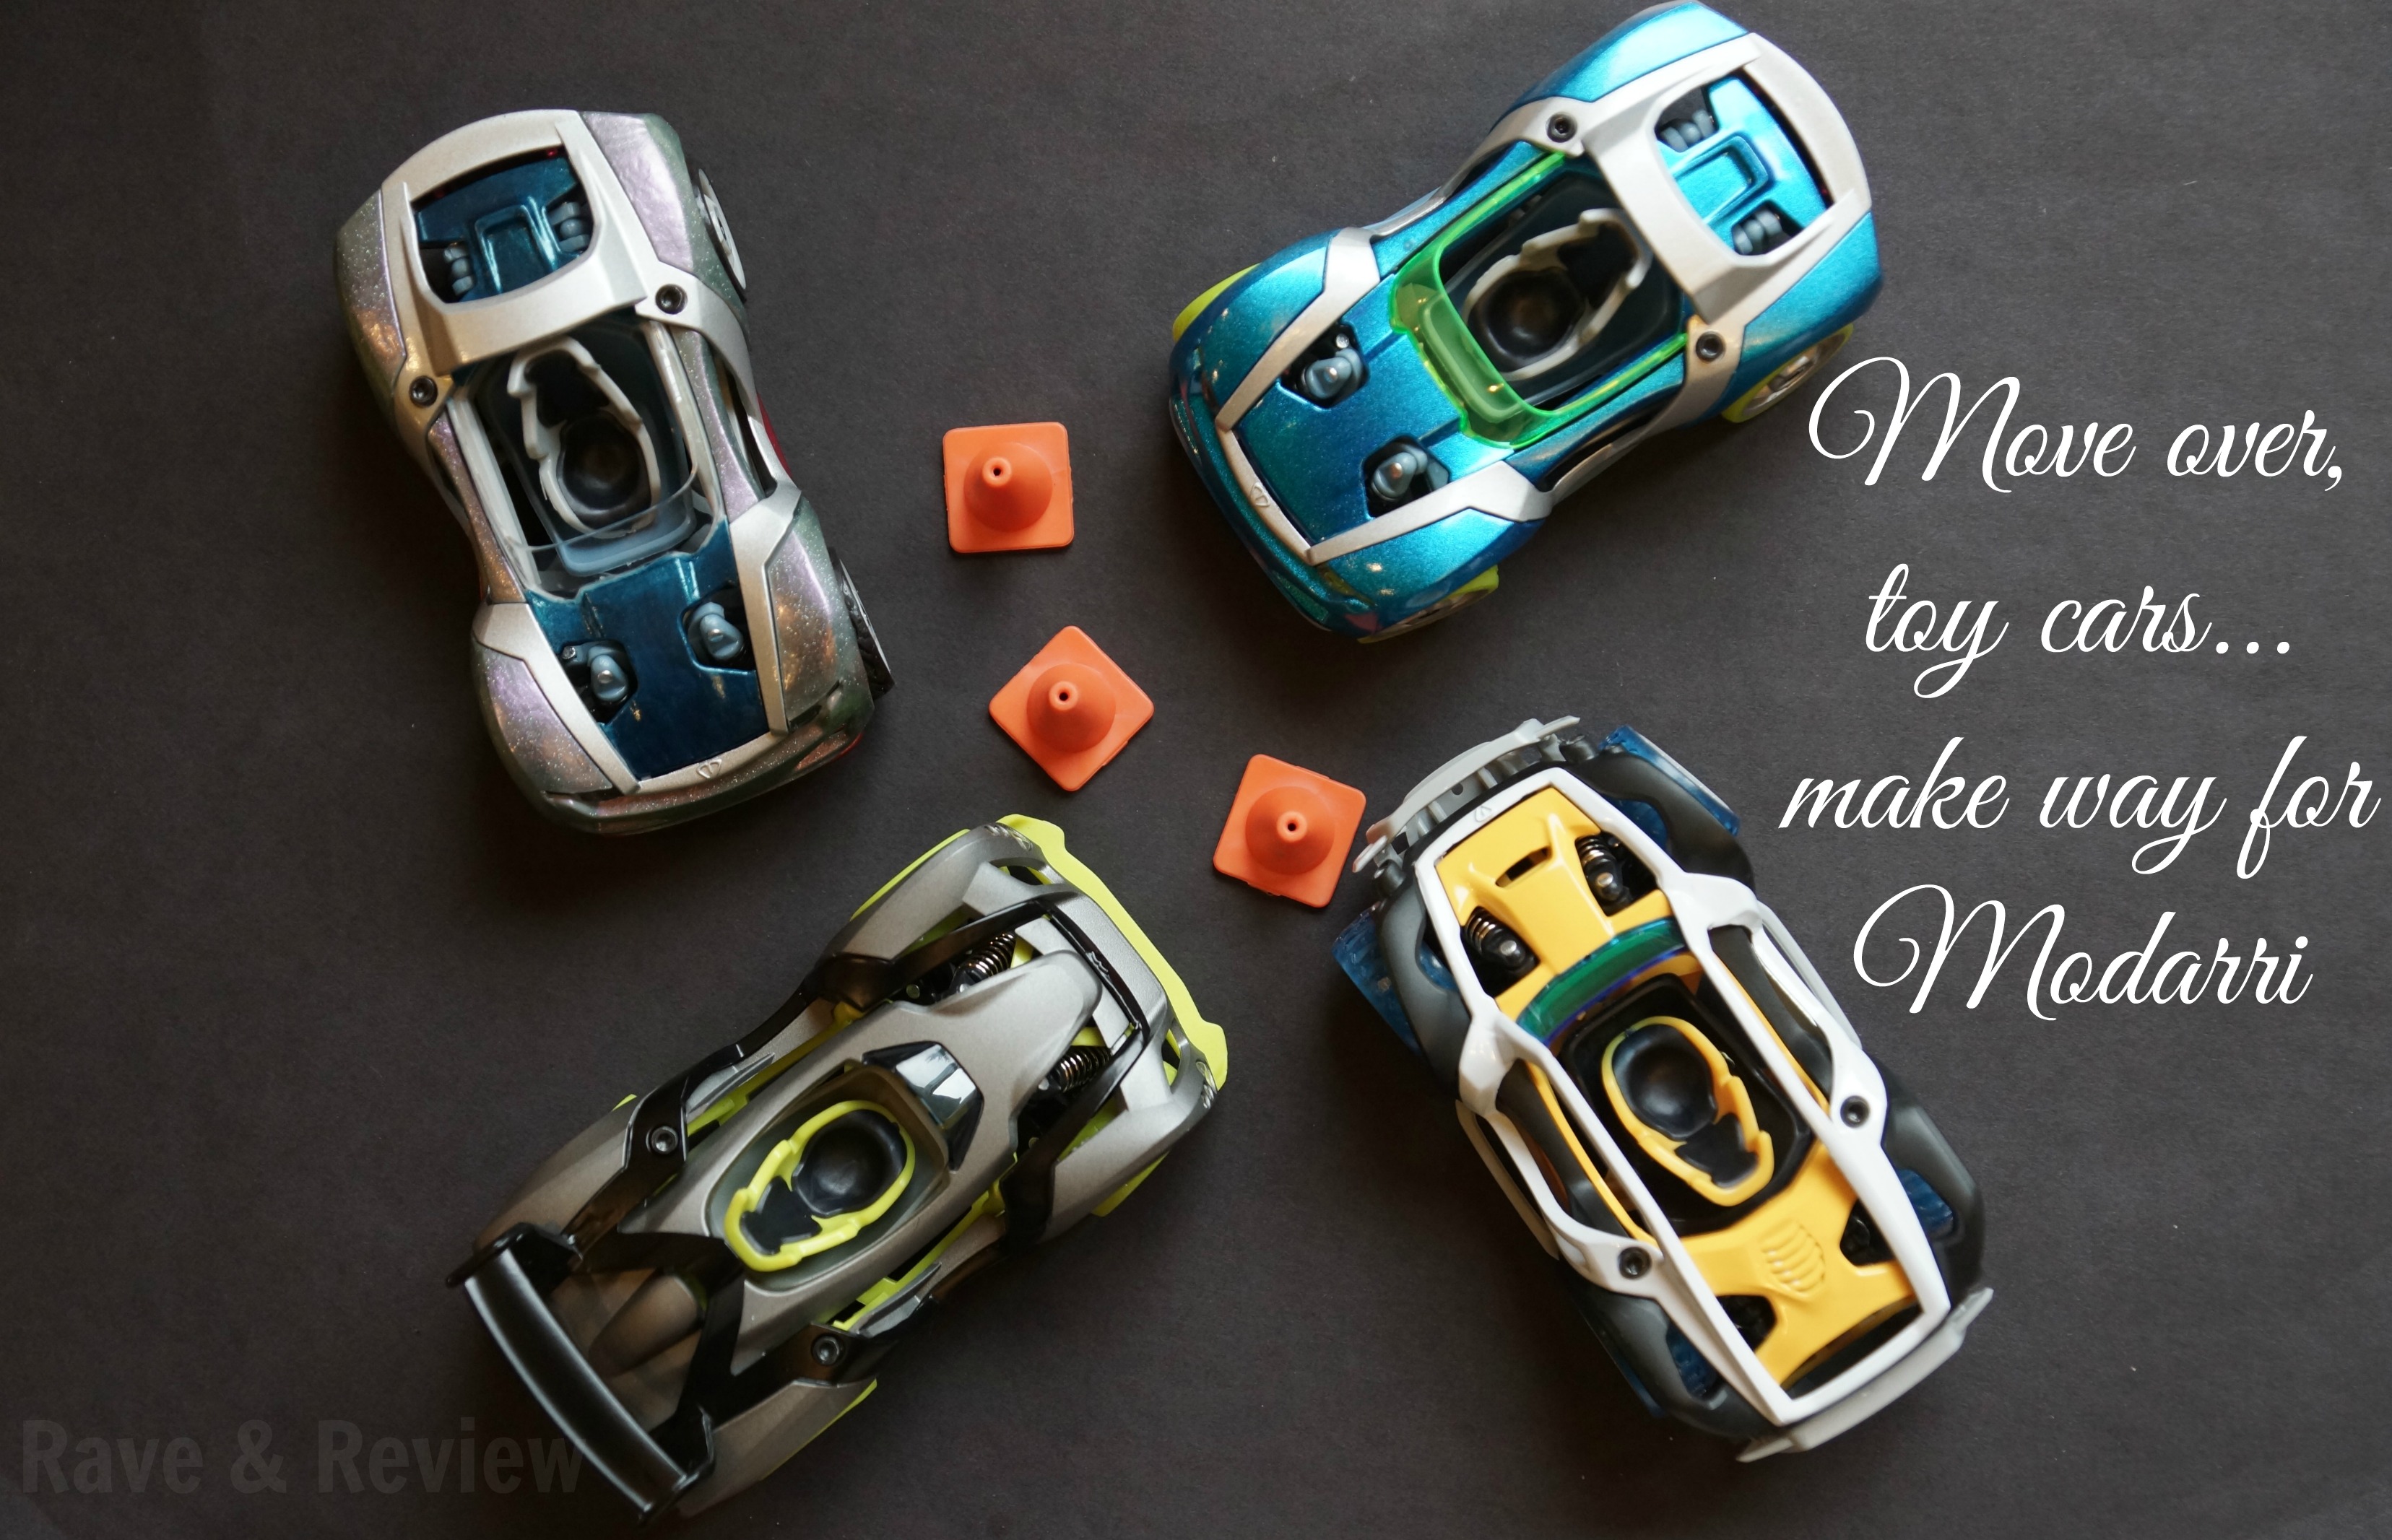 Not just a toy car: introducing the awesomely customizable Modarri ...